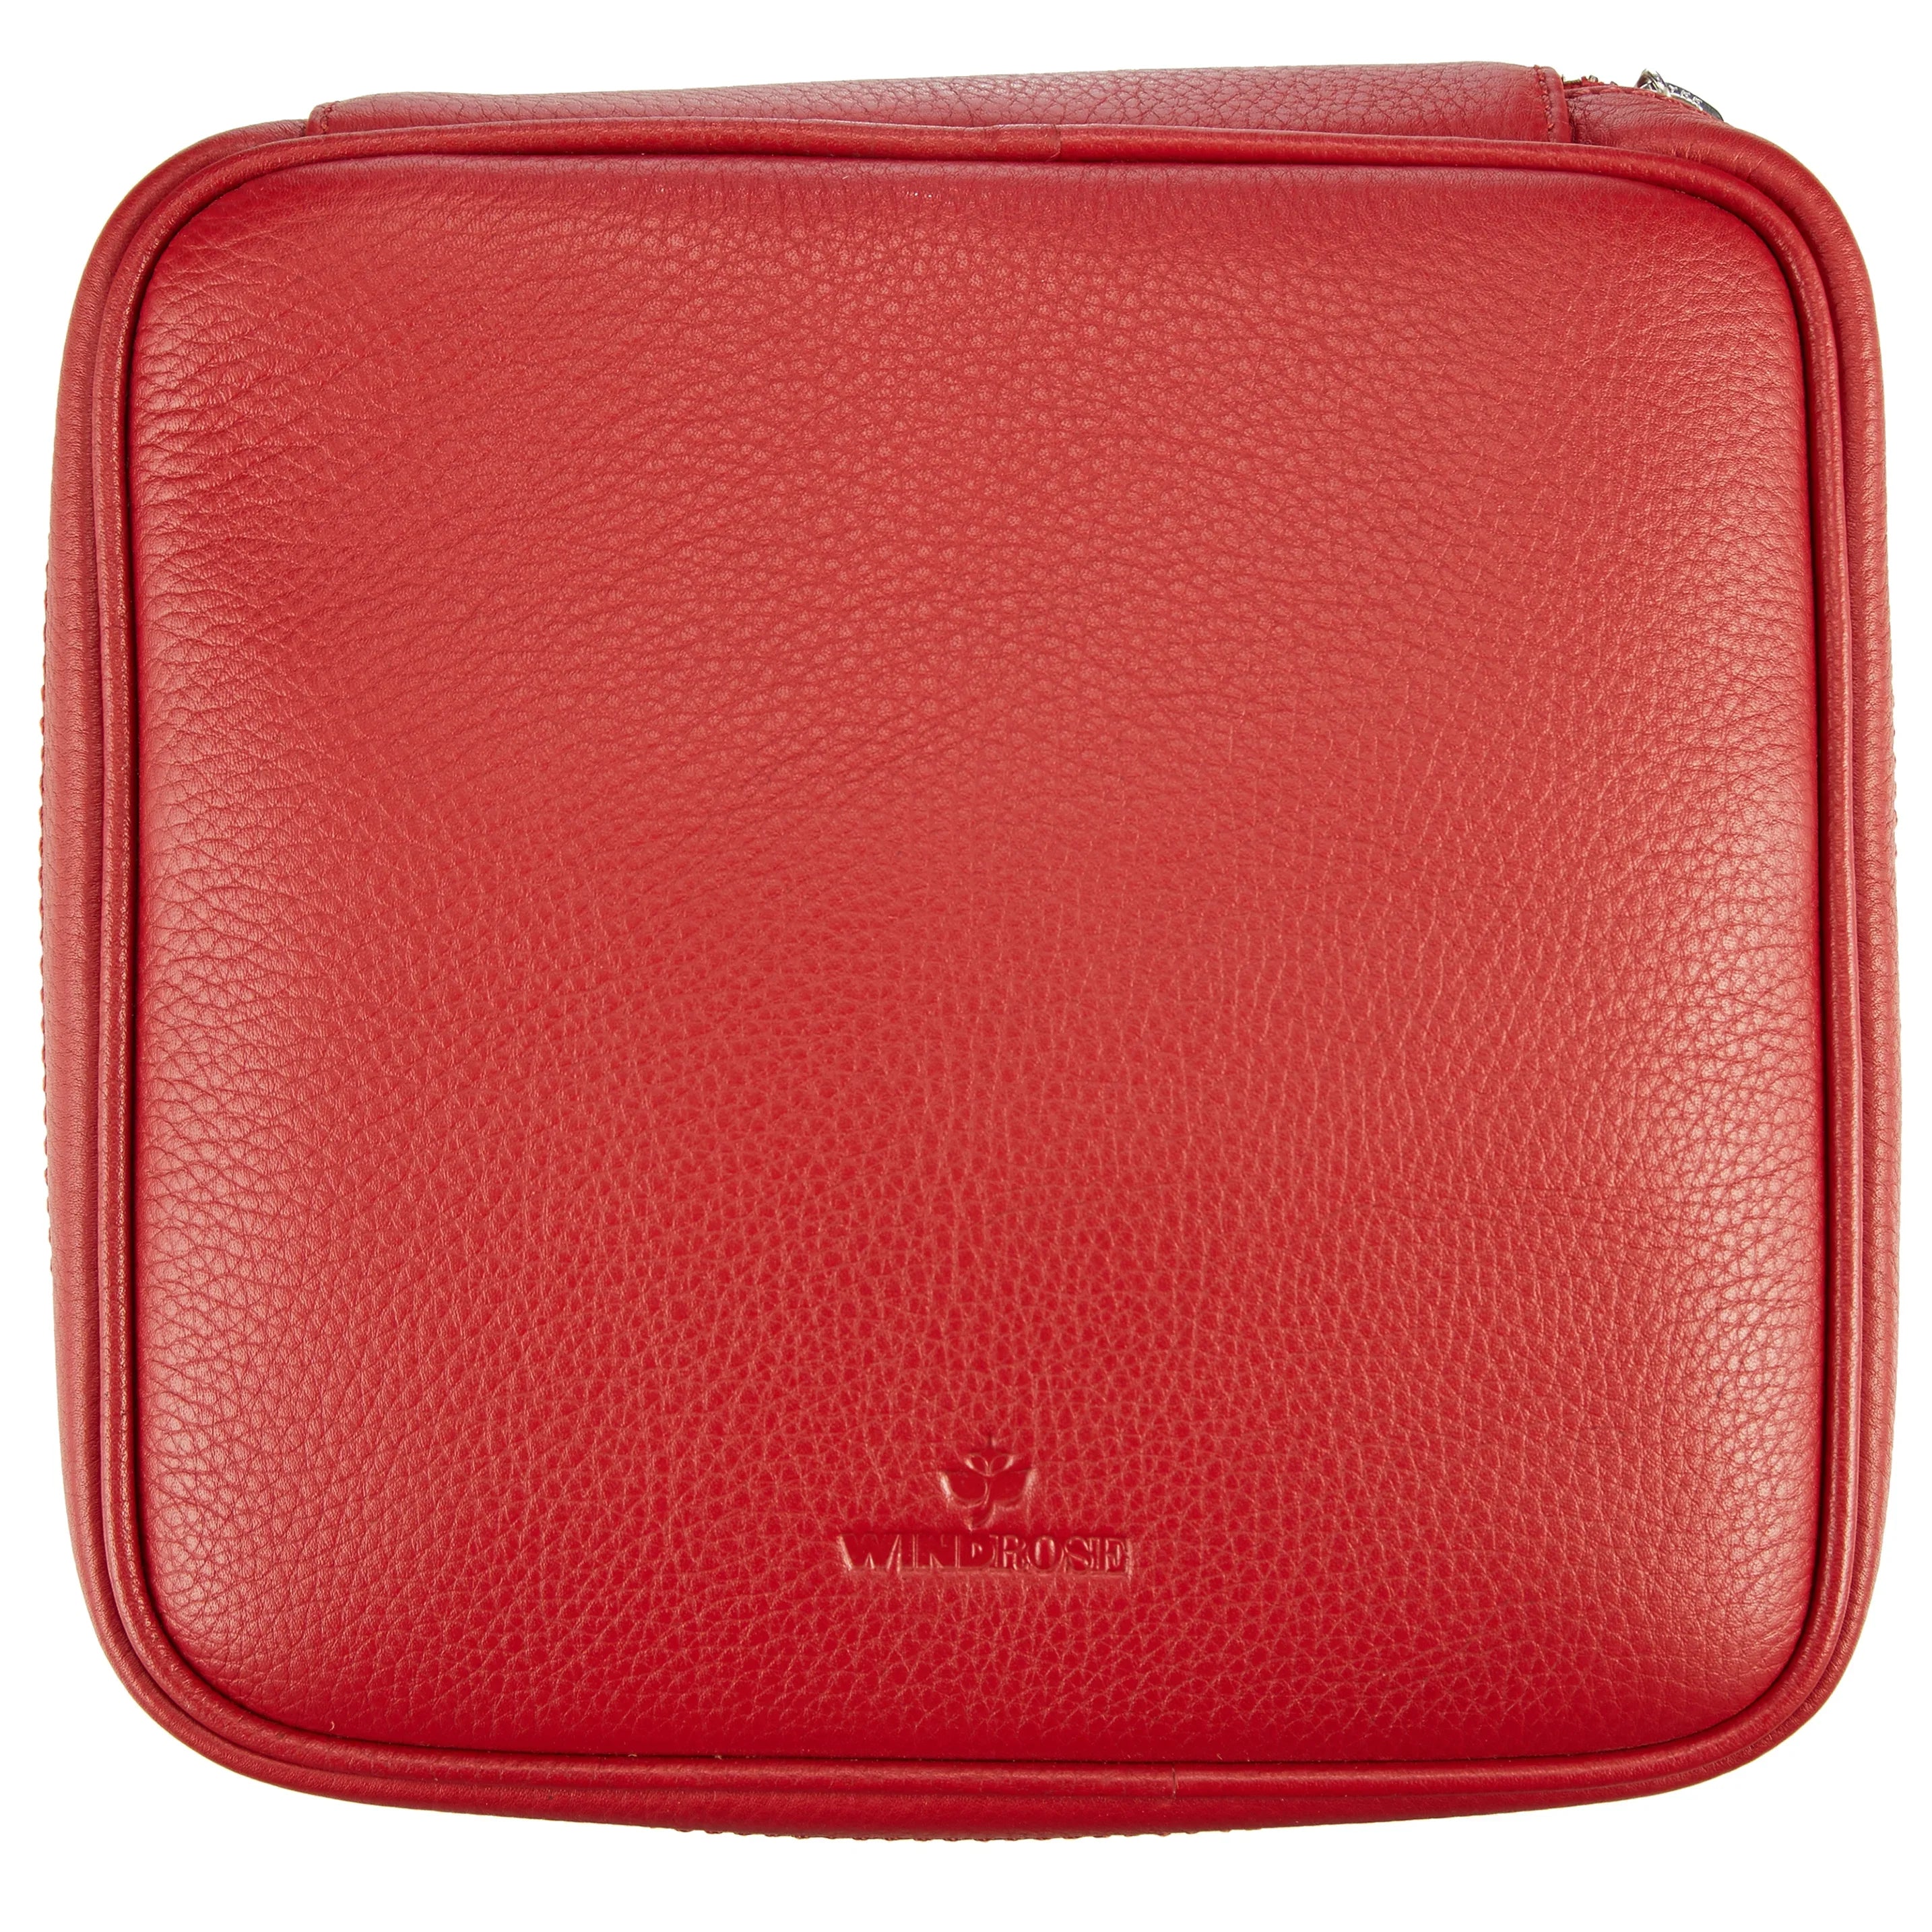 Windrose Soft jewelry case 20 cm - red